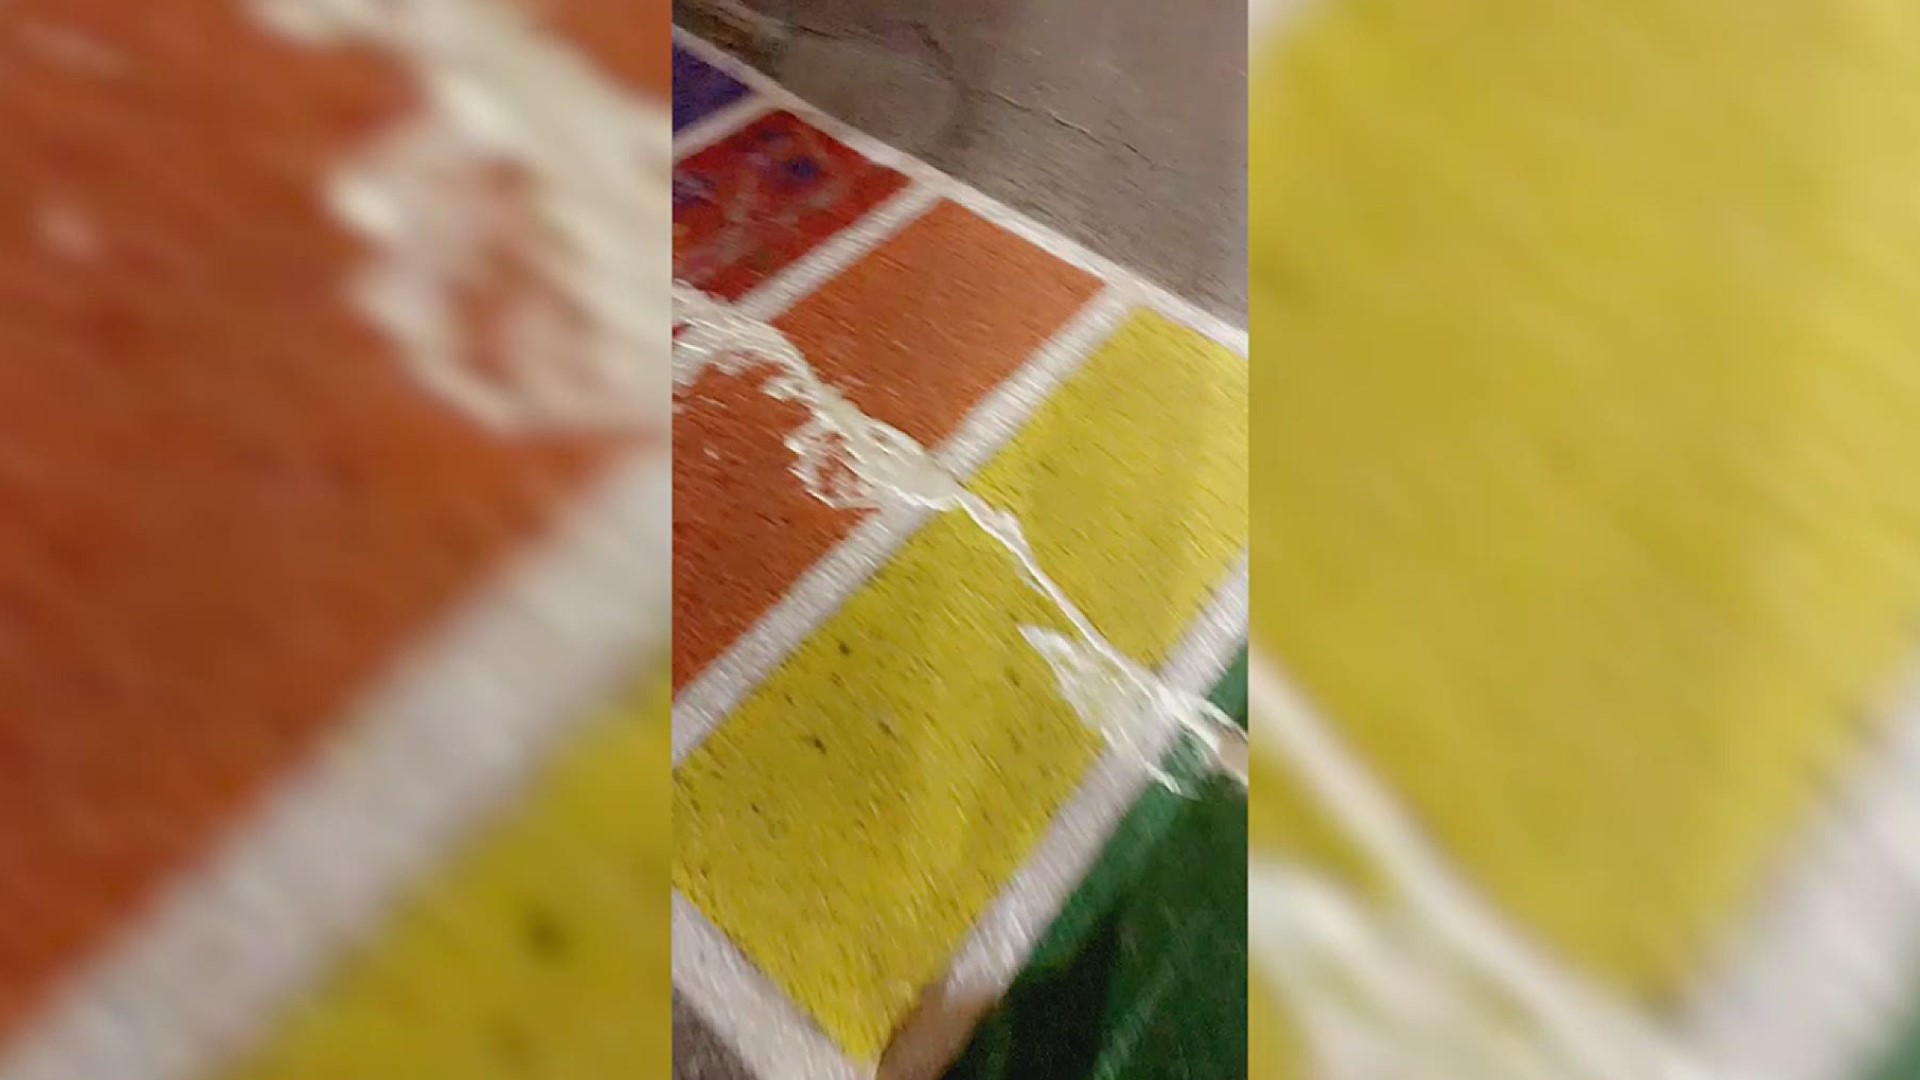 The Eastport City Manager said the suspect put white paint on both rainbow crosswalks, which were painted for Pride Month, late Tuesday night